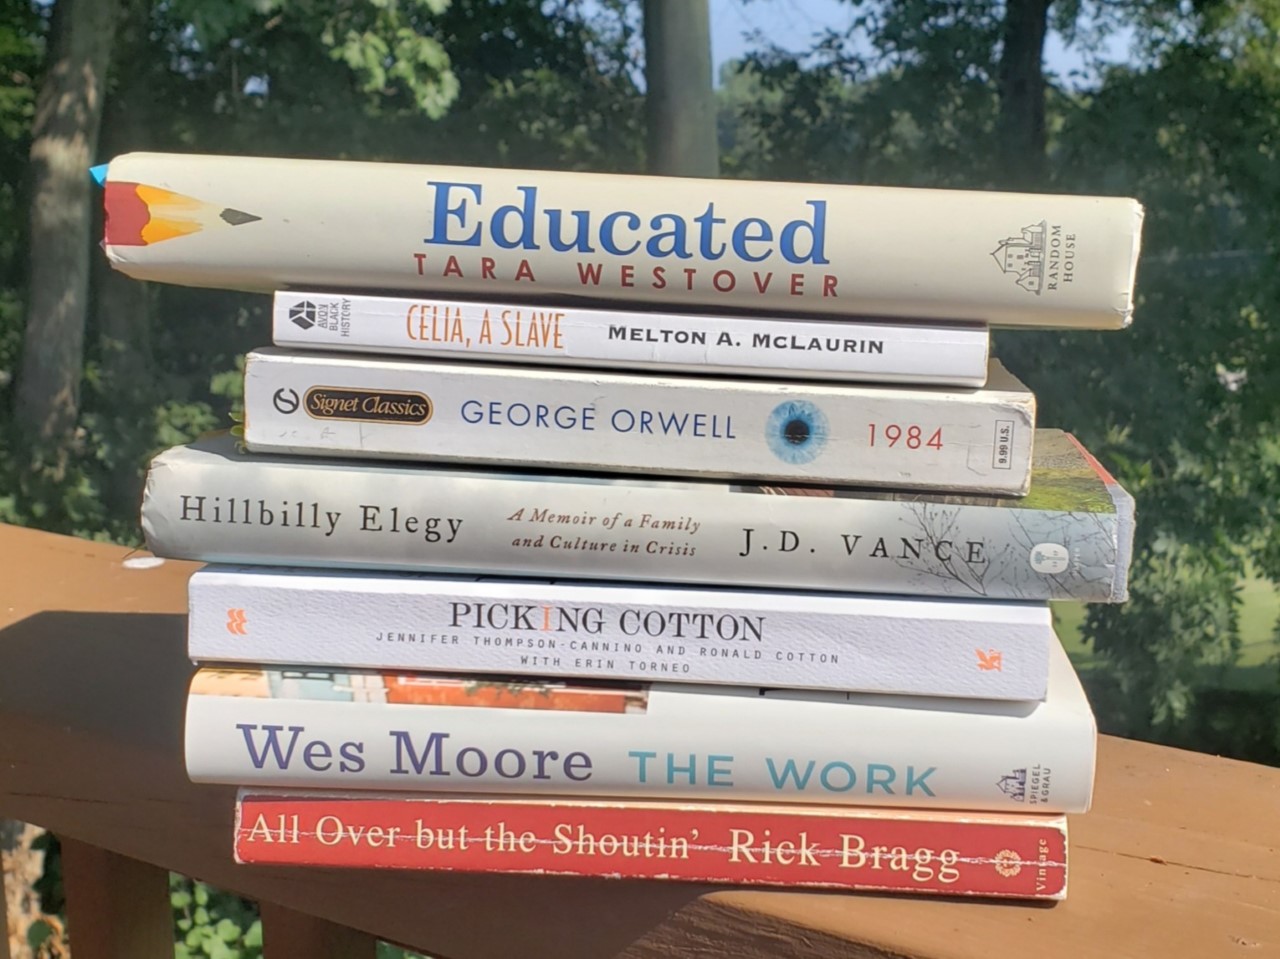 the last seven common read books stacked on a rail